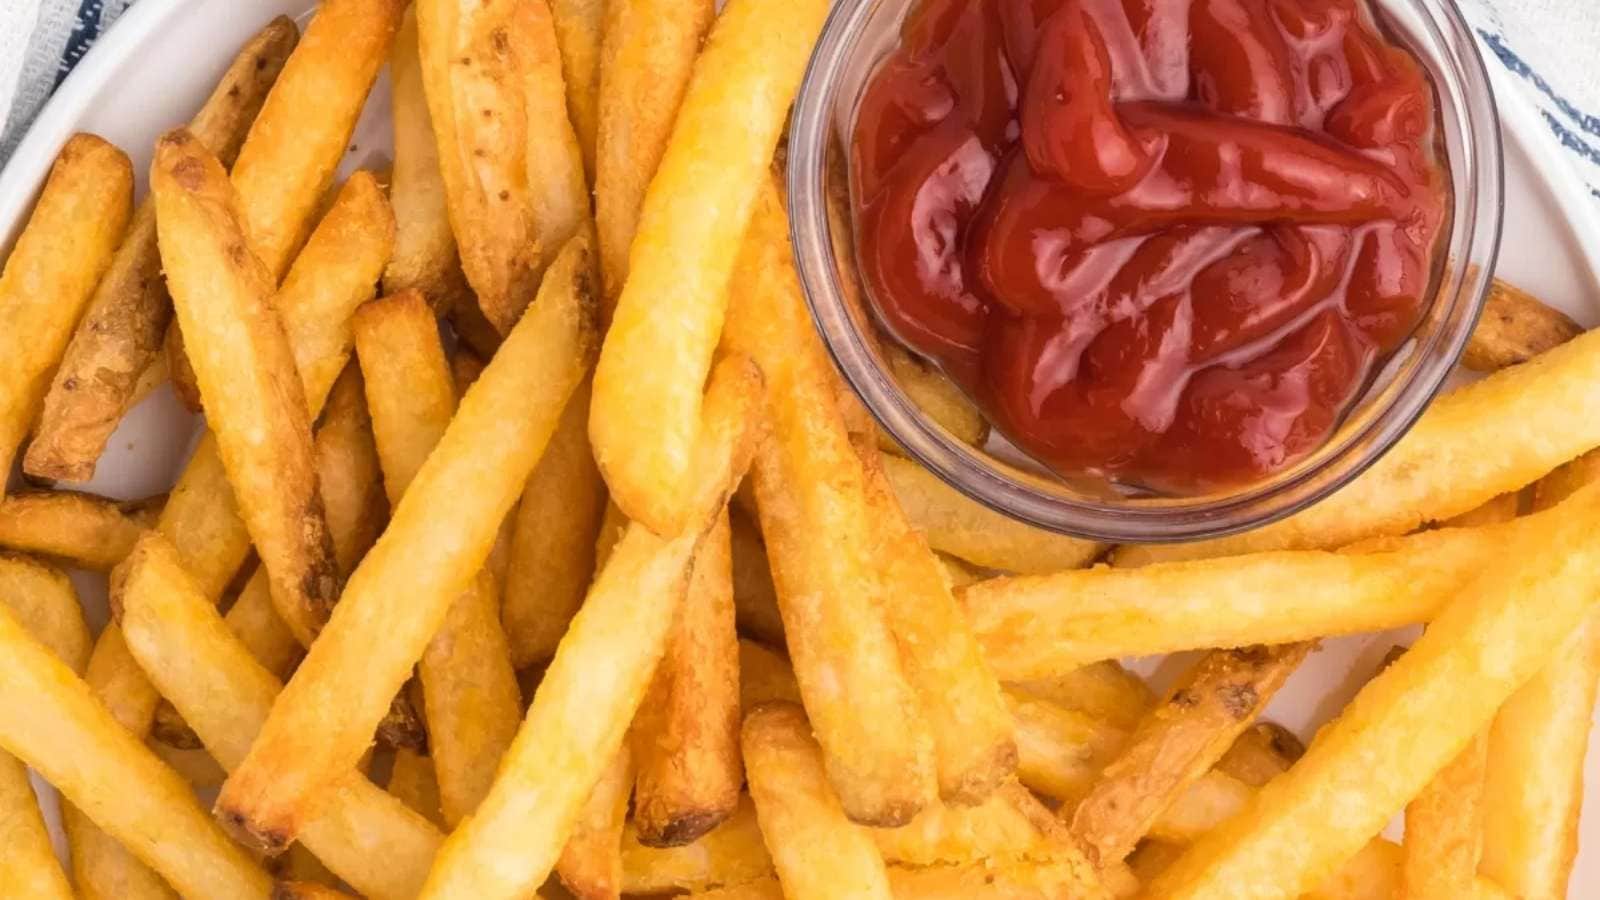 French fries with ketchup on a plate.